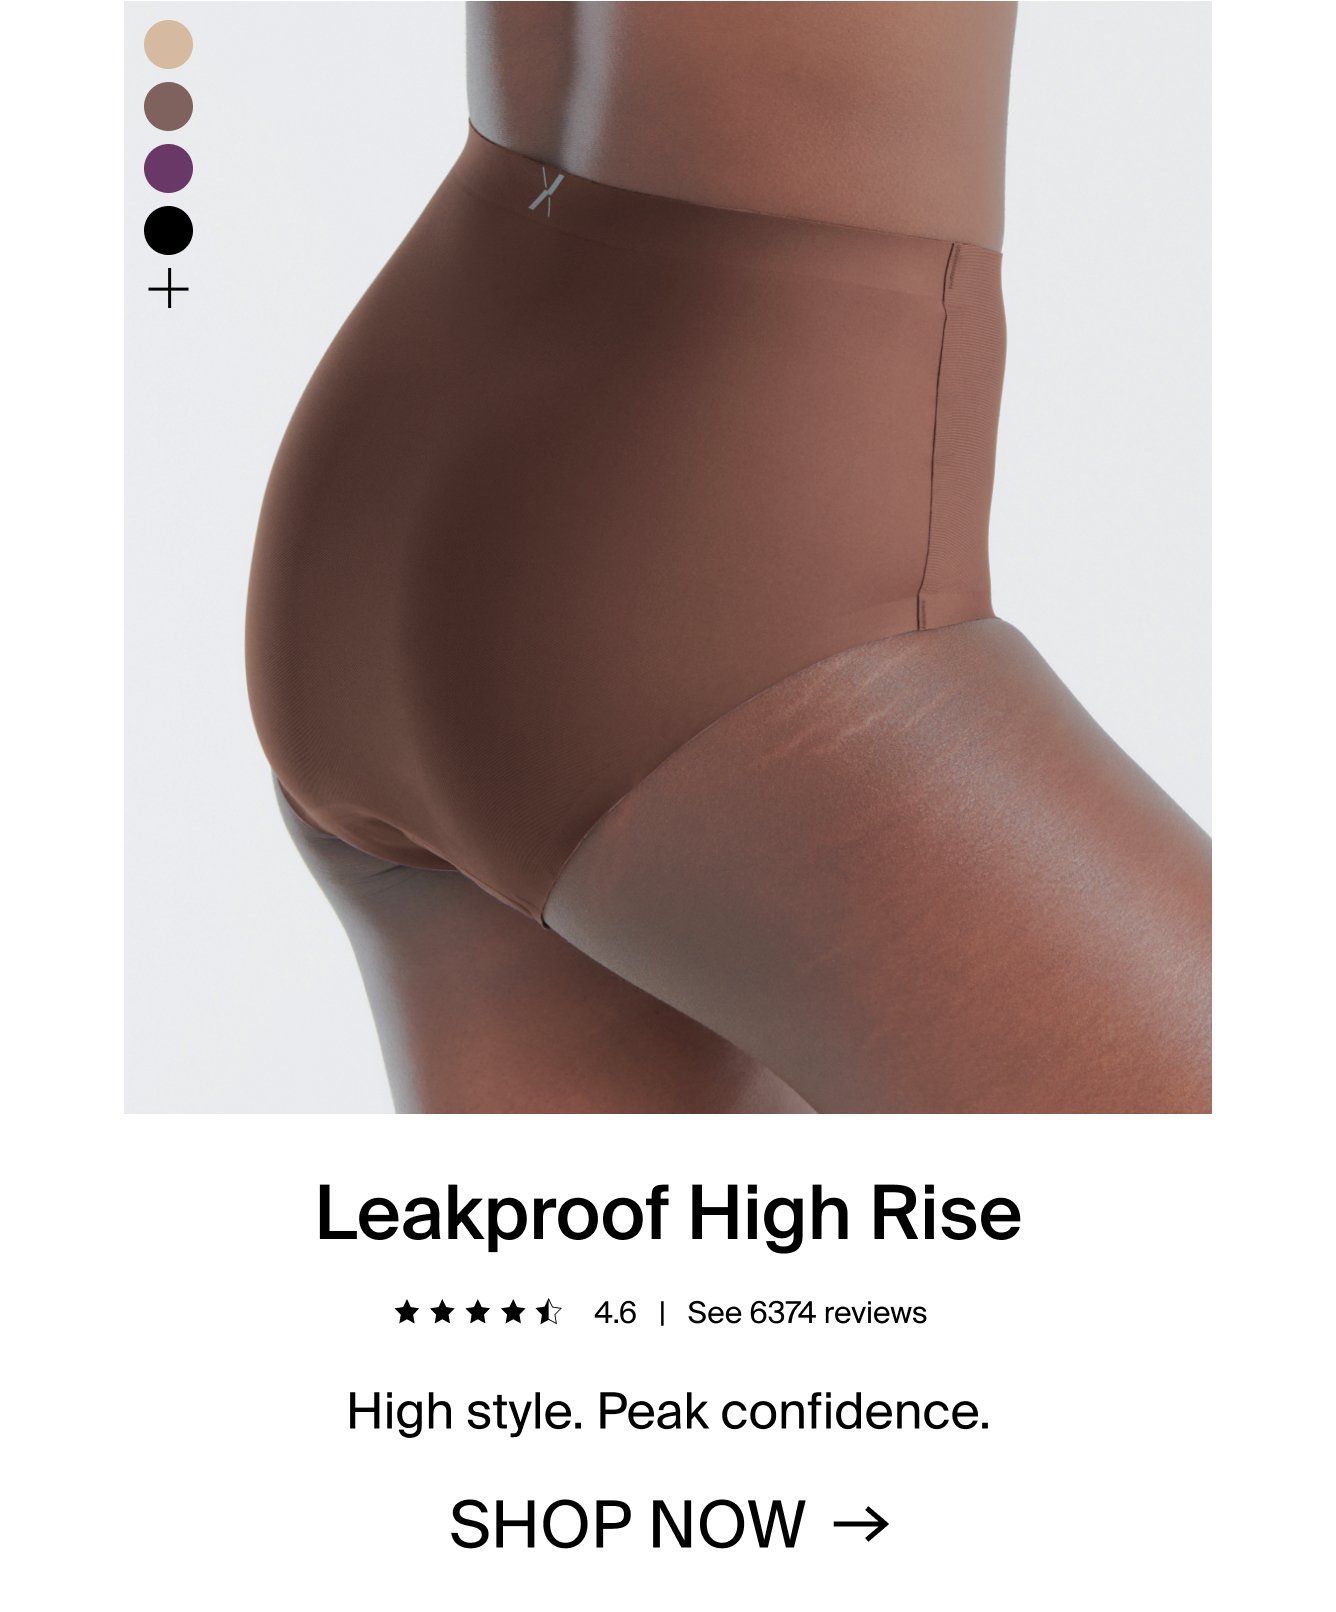 Leakproof High Rise. 4.5 stars. See 6374 reviews.High style. Peak confidence.